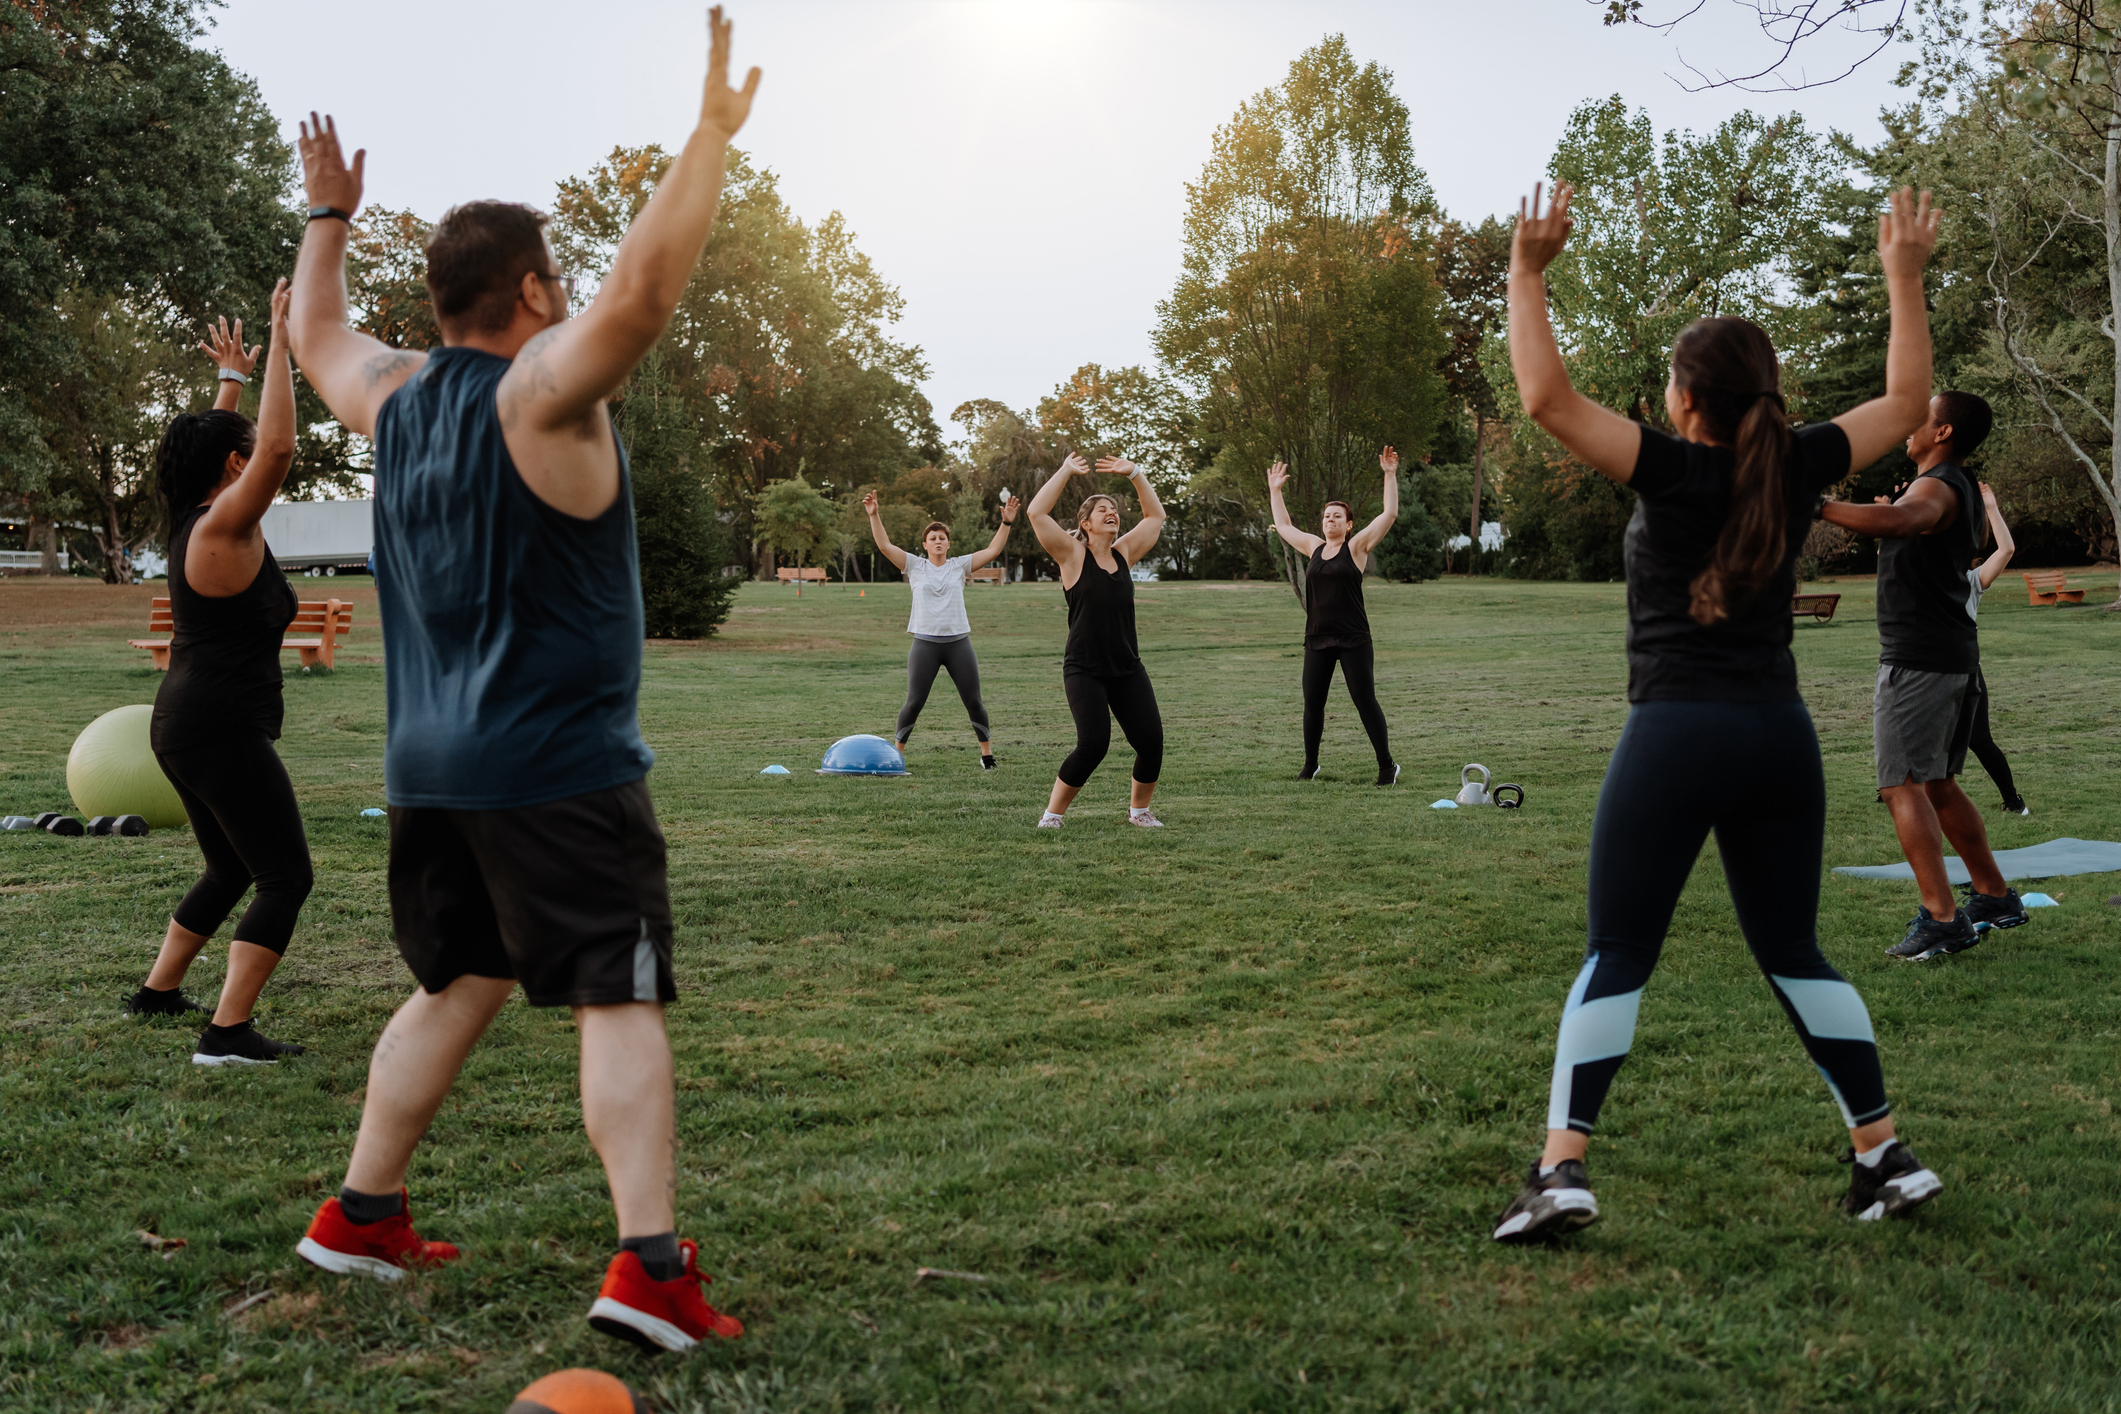 Group of people participating in an outdoor exercise class in a park